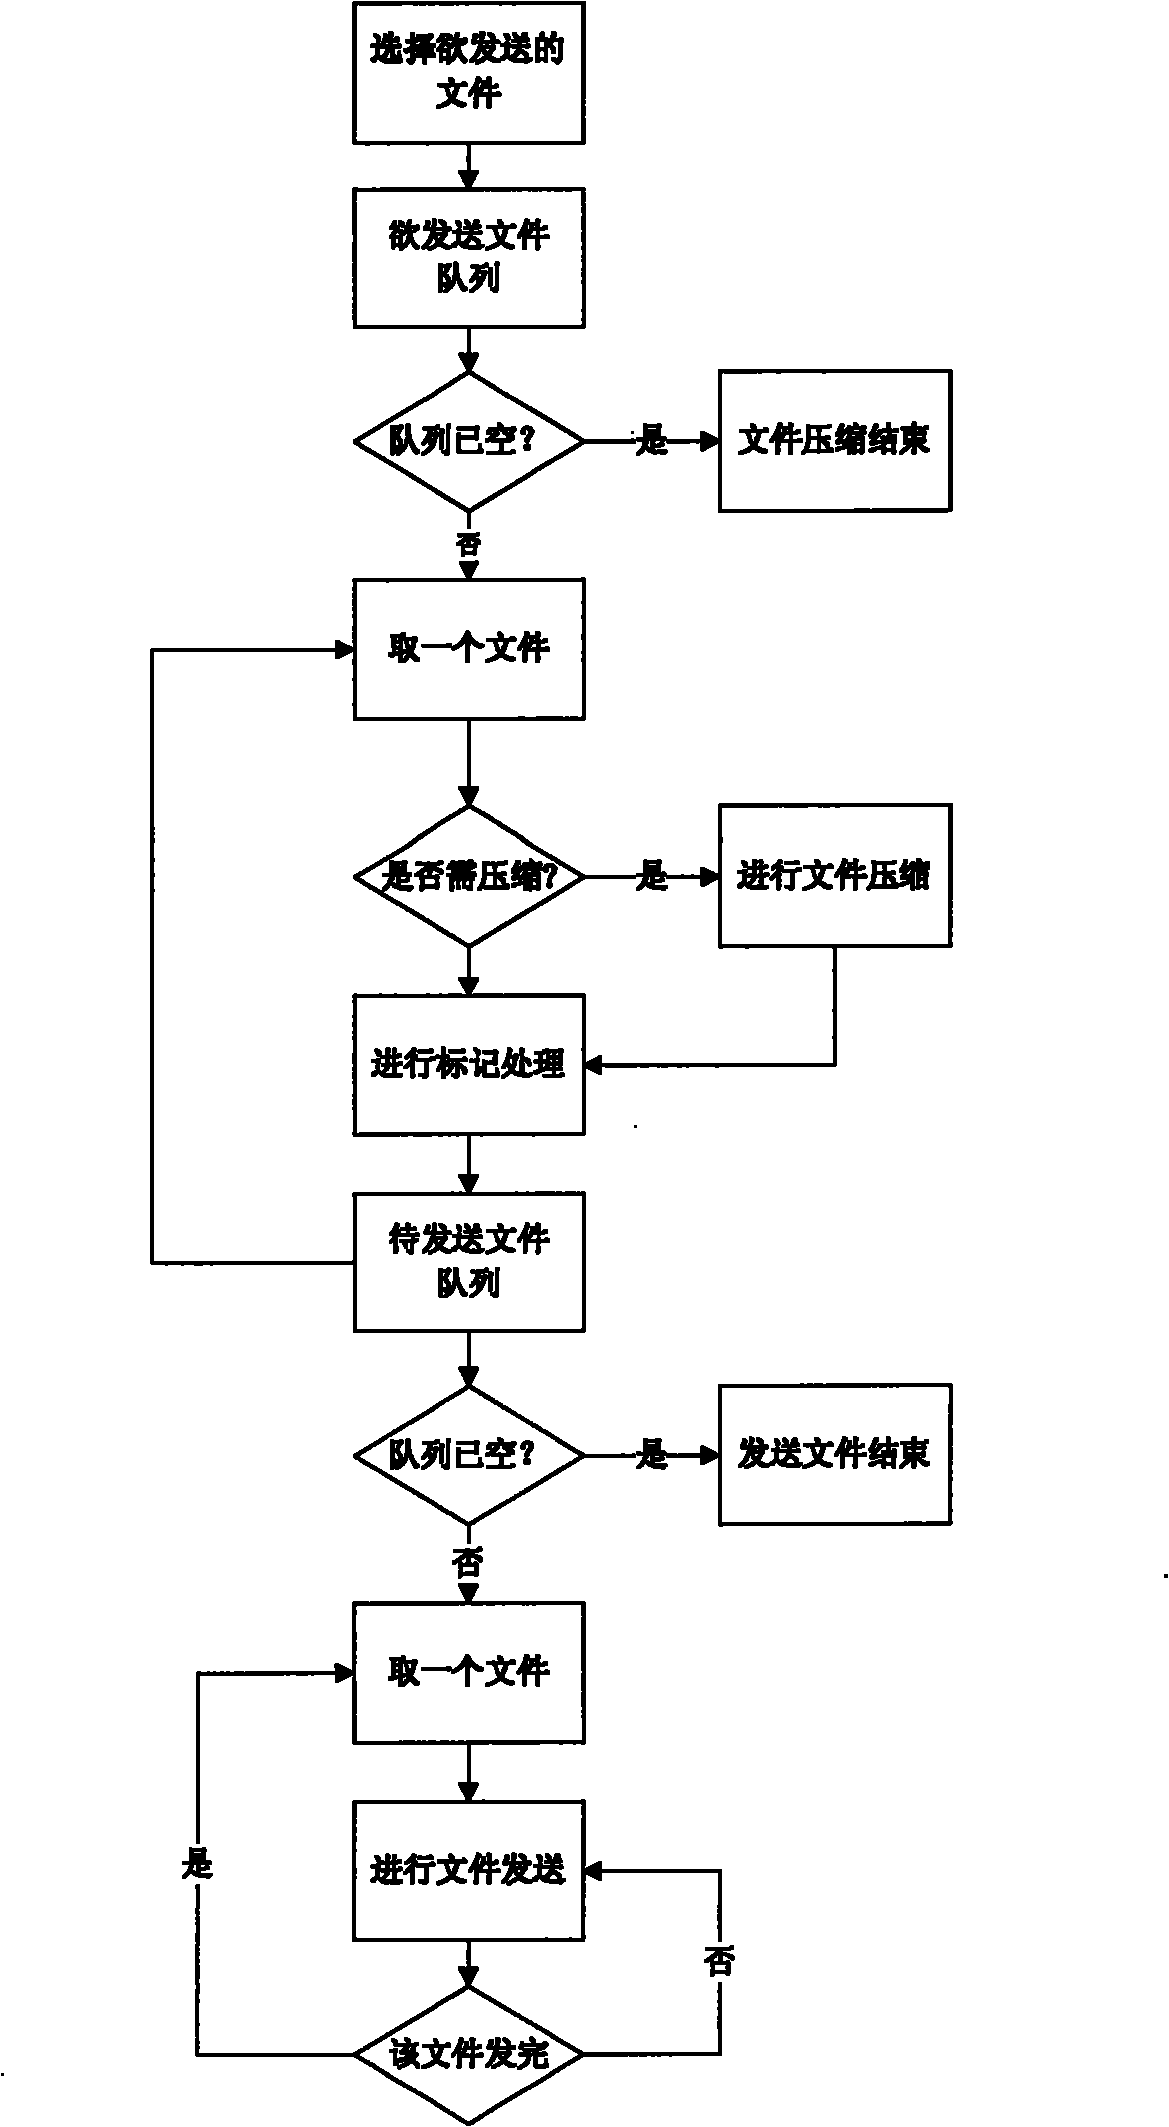 Method for compressing file in instant communication and network storage system